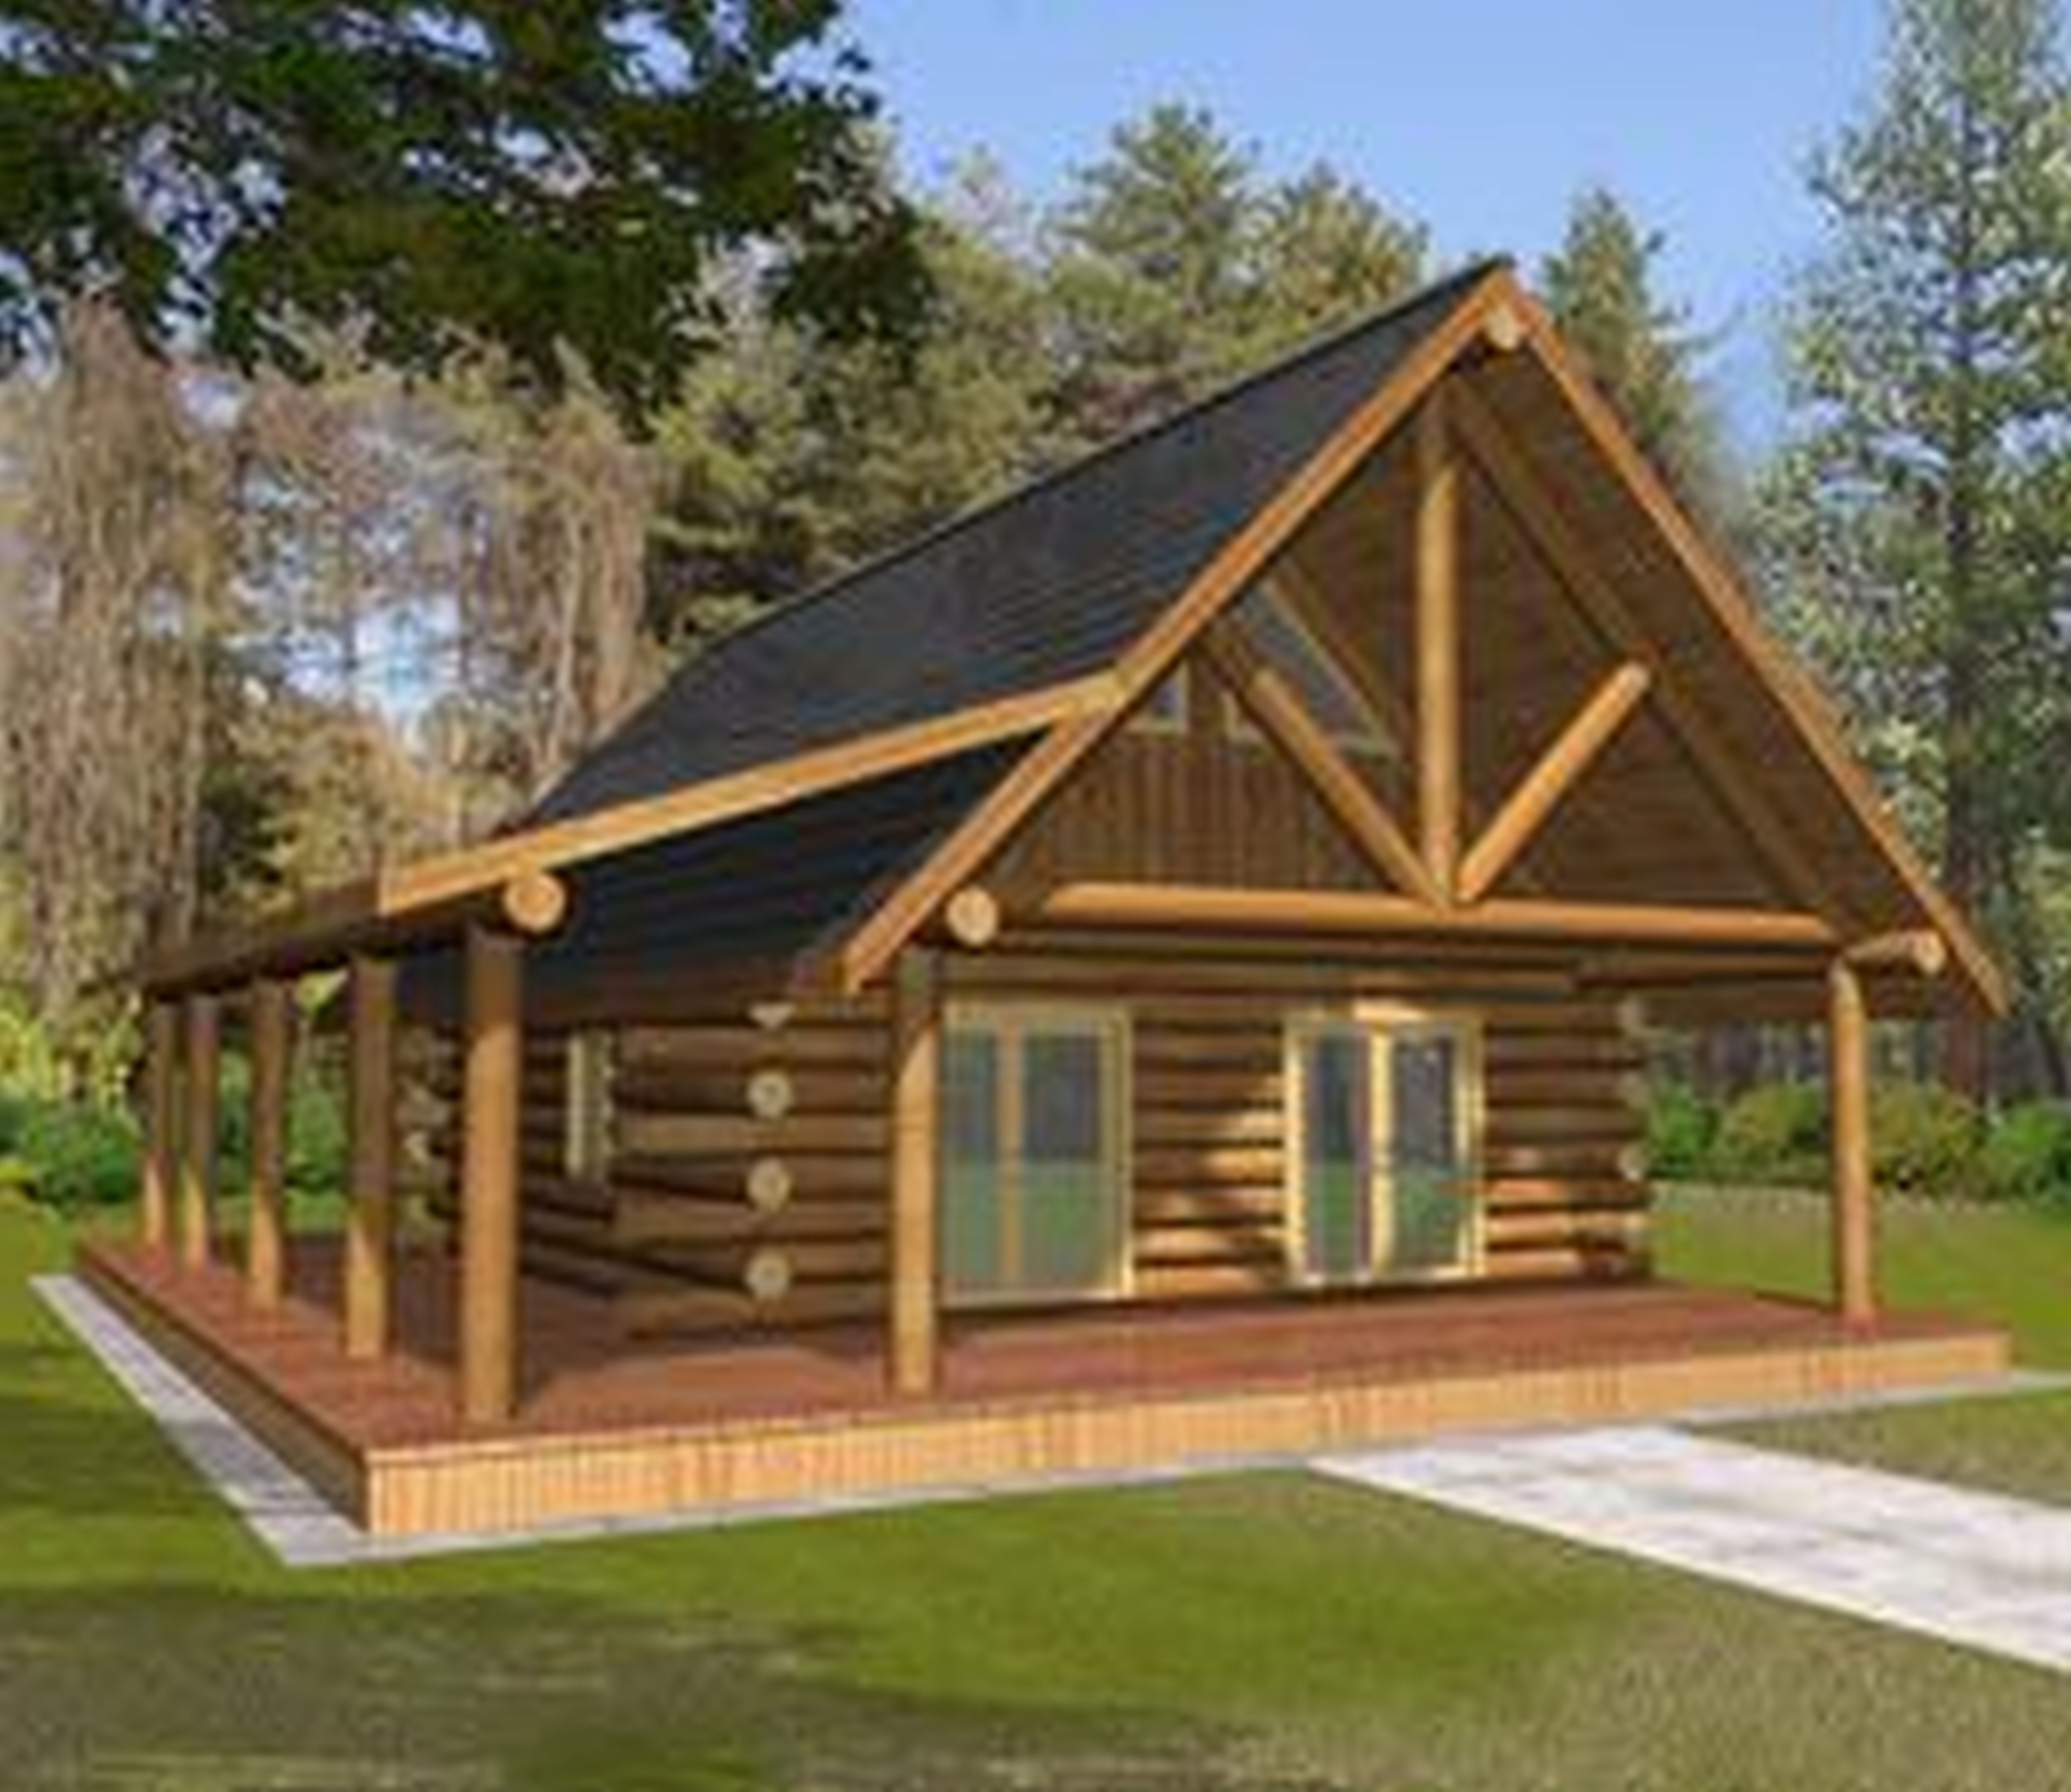 wooden country house plans photo - 1